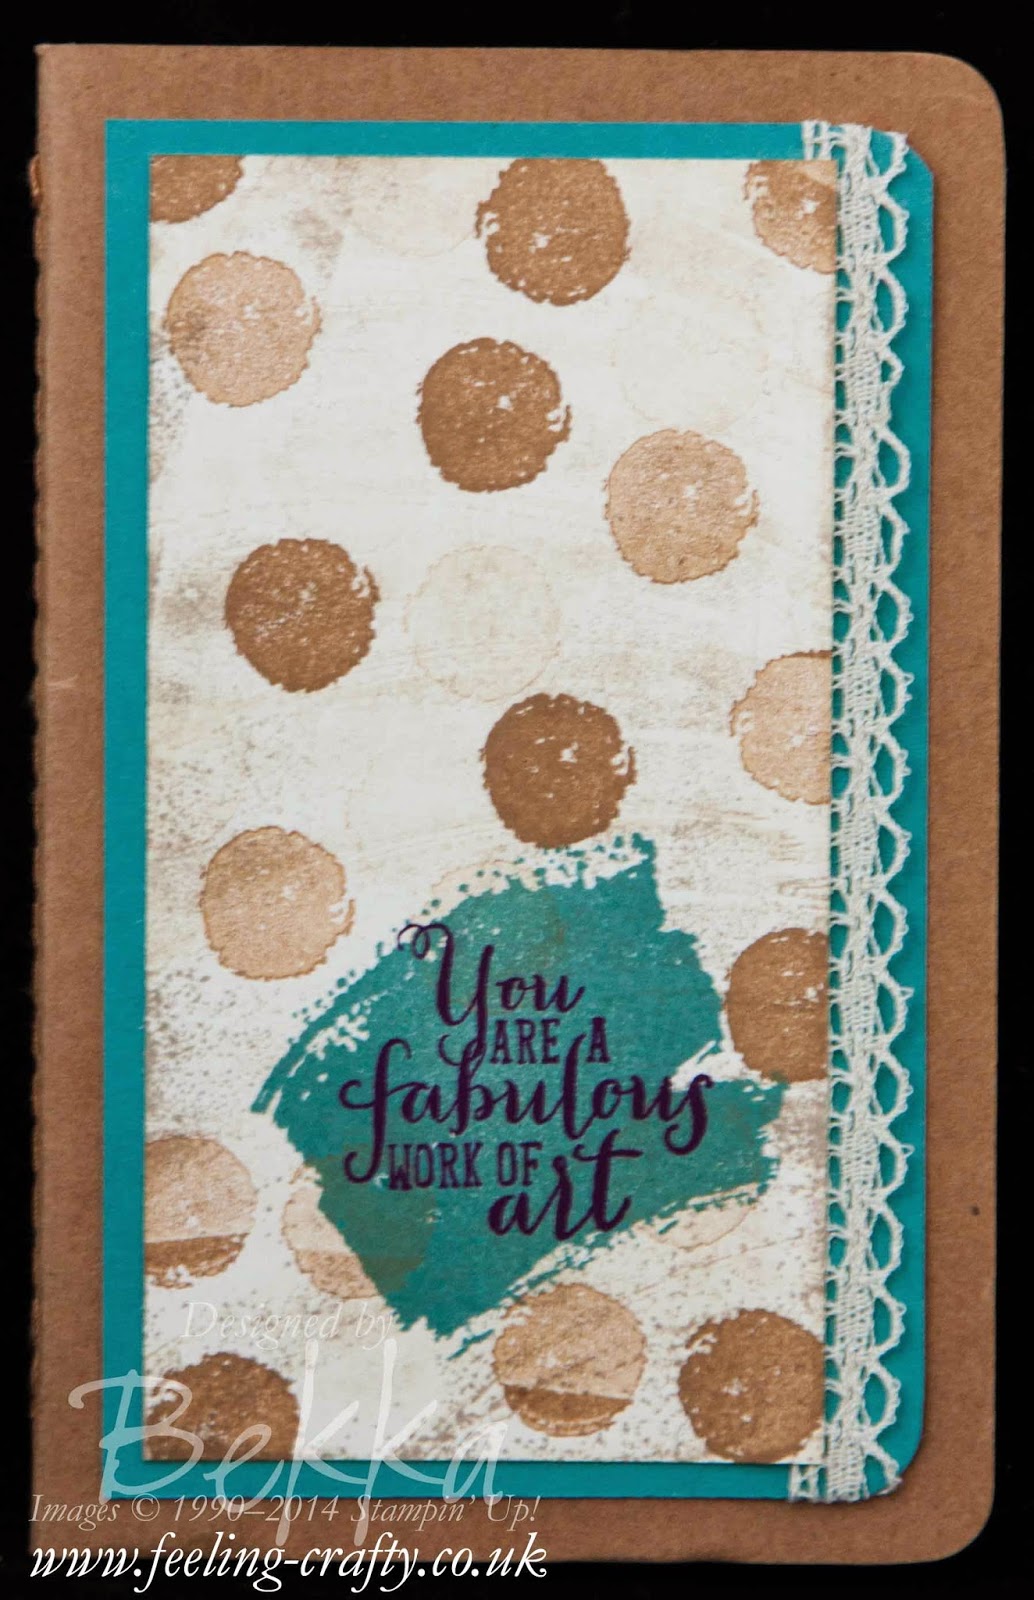 Work of Art Class Notebook by Stampin' Up! UK Independent Demonstrator Bekka Prideaux